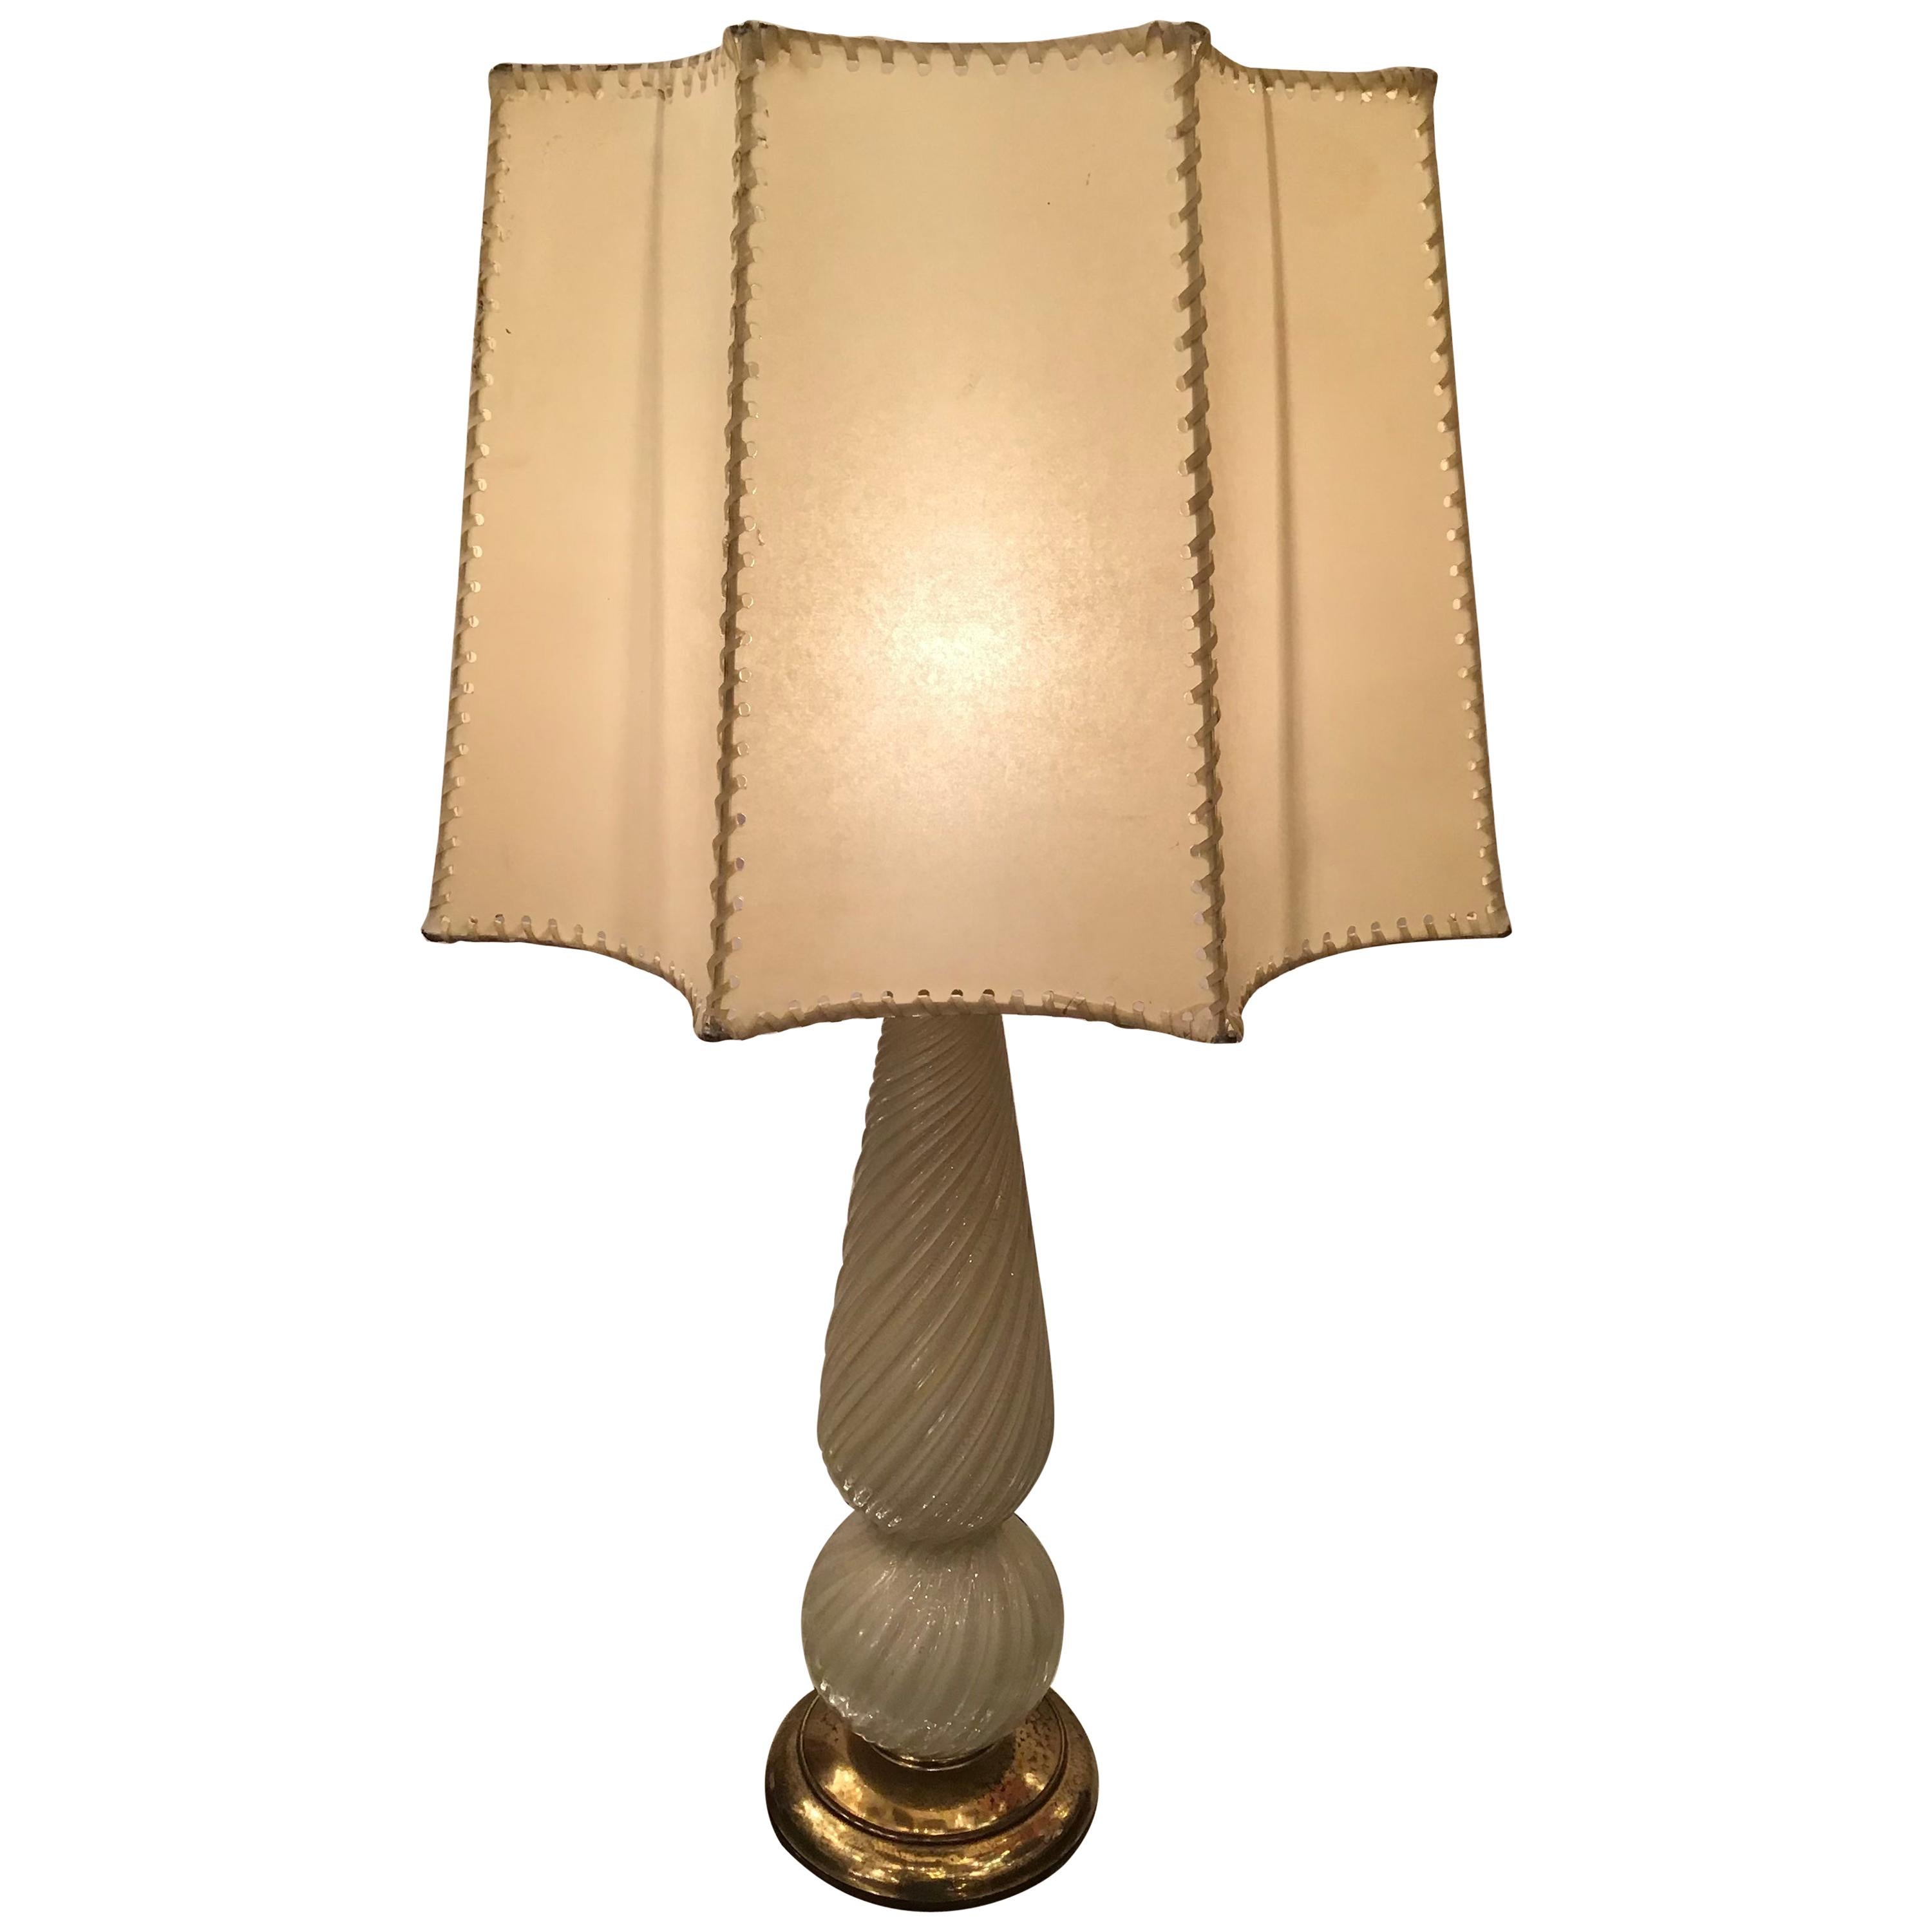 Seguso Table Lamp Murano Glass Brass Lampshade, 1940, Italy For Sale